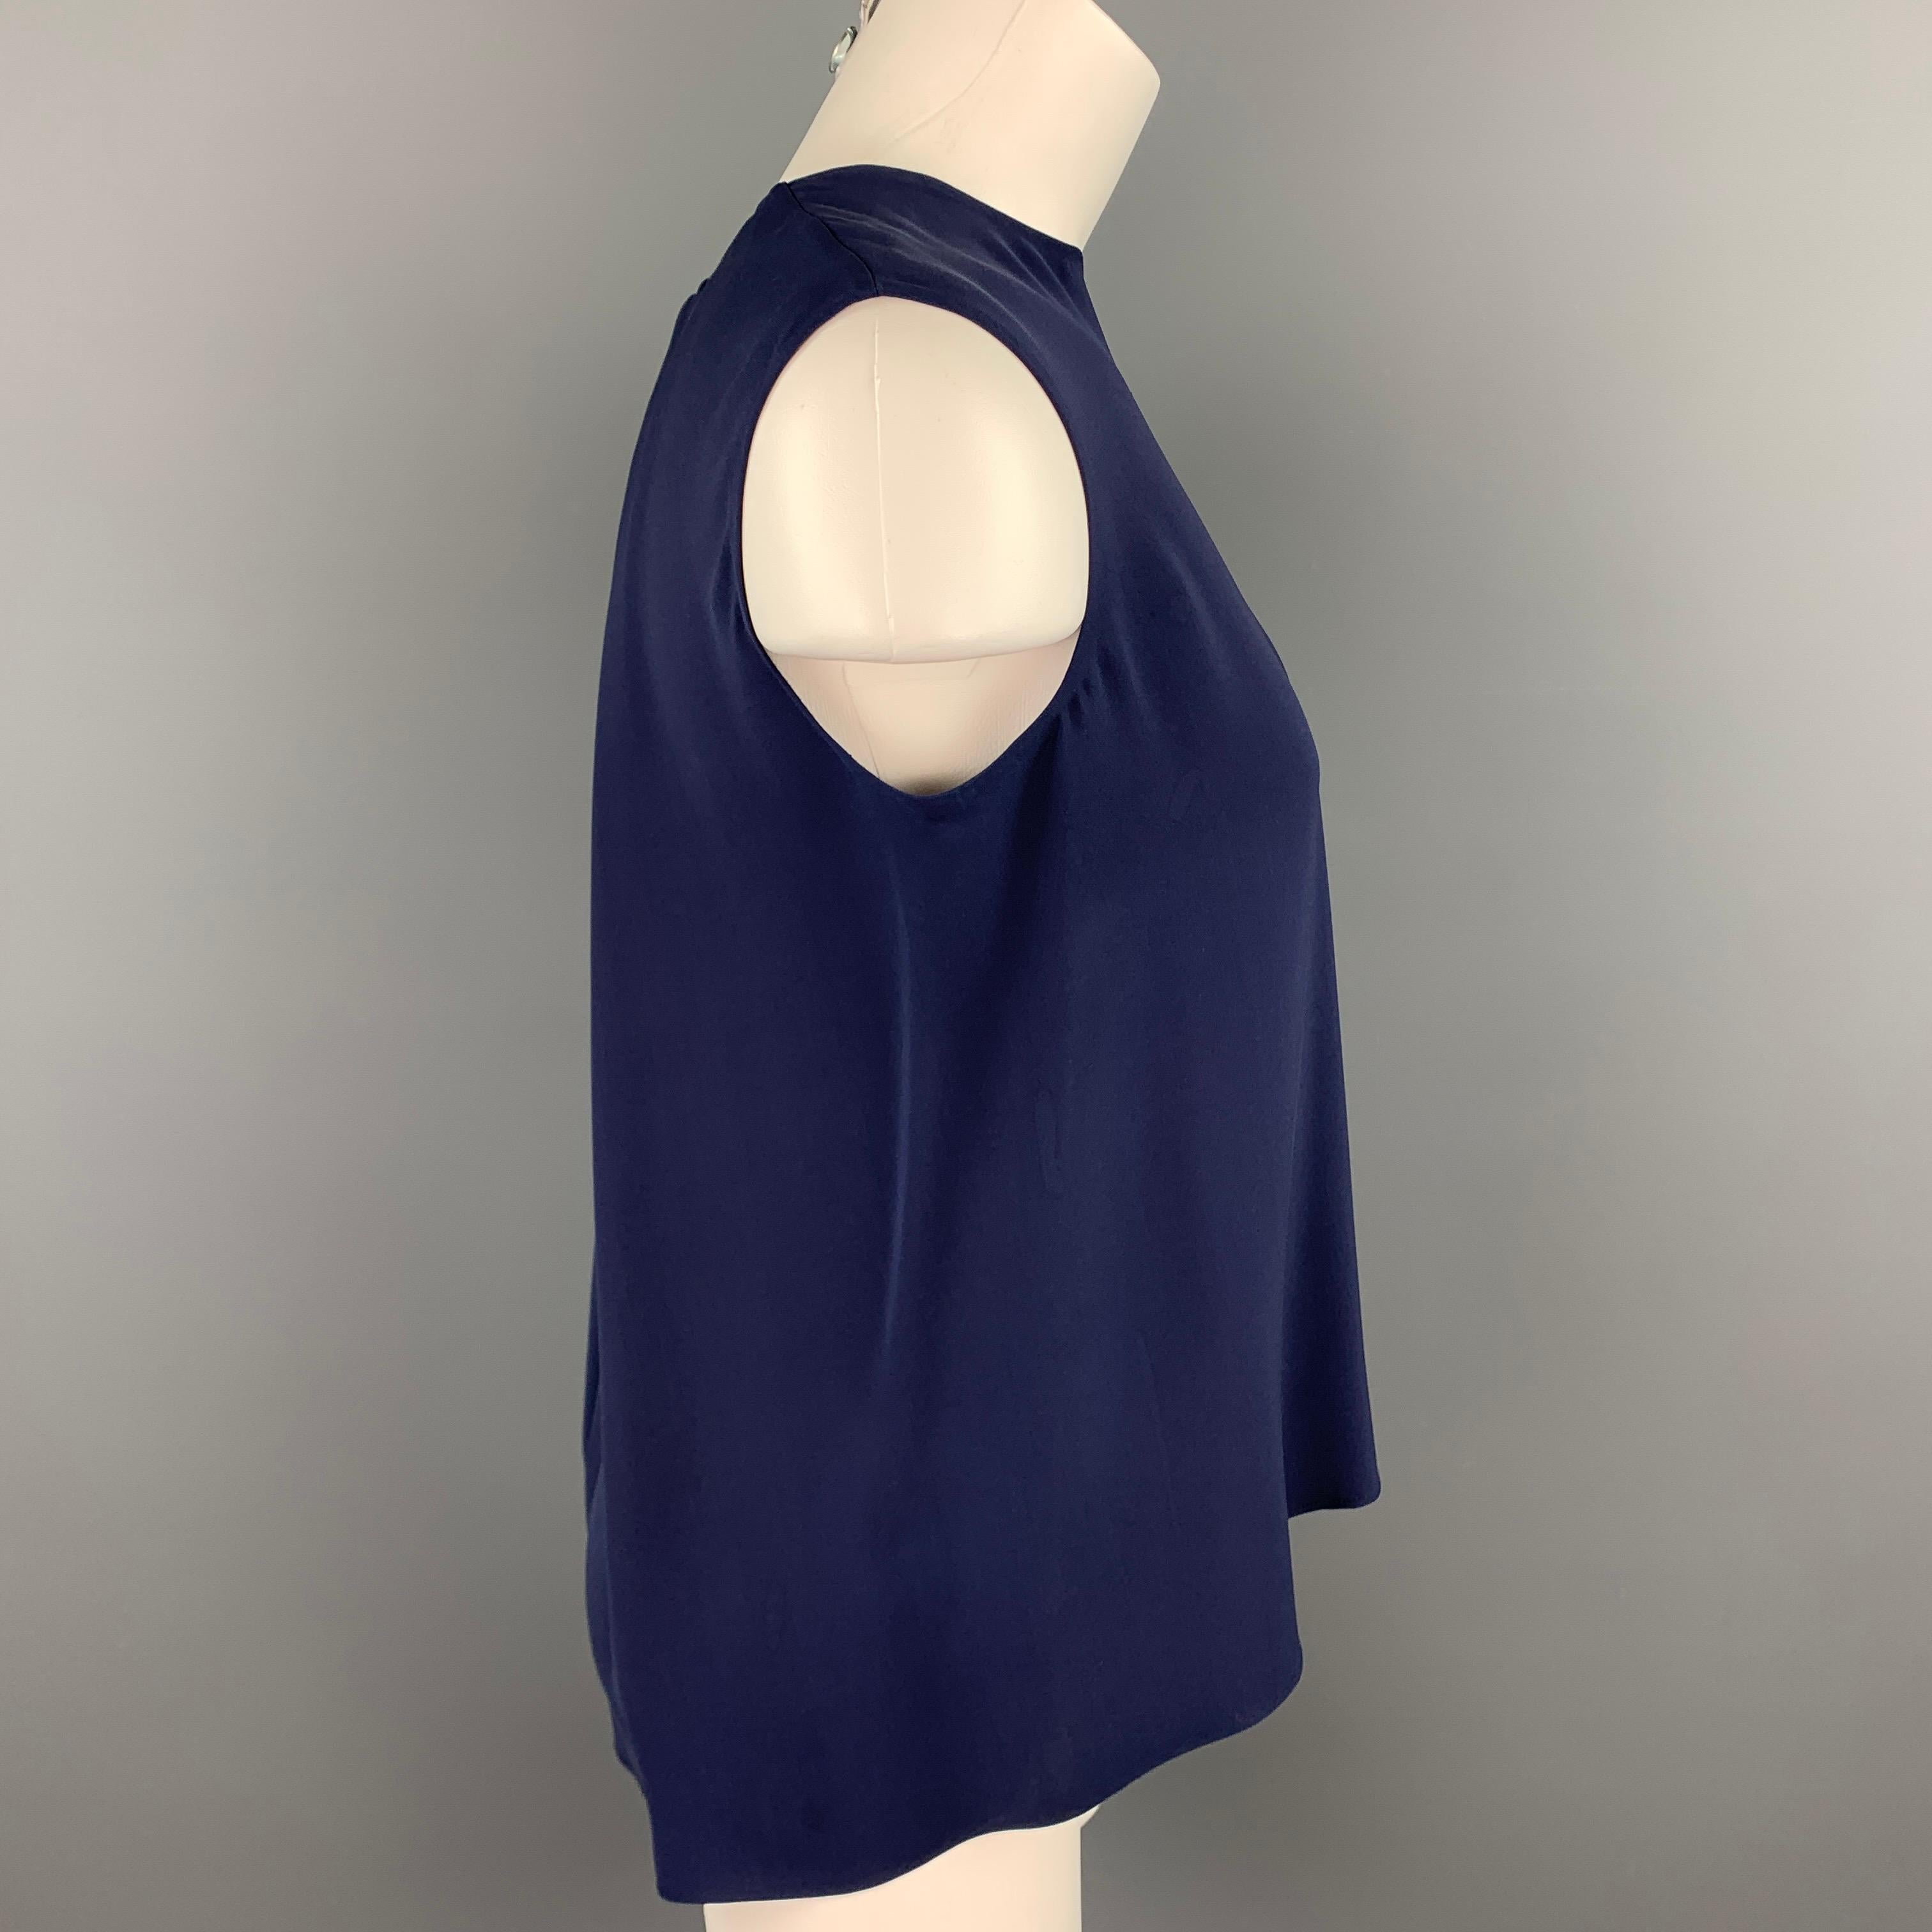 CAROLINA HERRERA sleeveless blouse comes in a navy silk featuring an asymmetrical hem and a back zip up closure. 

Good Pre-Owned Condition.
Marked: 4

Measurements:

Shoulder: 15 in.
Bust: 36 in.
Length: 24.5 in. 